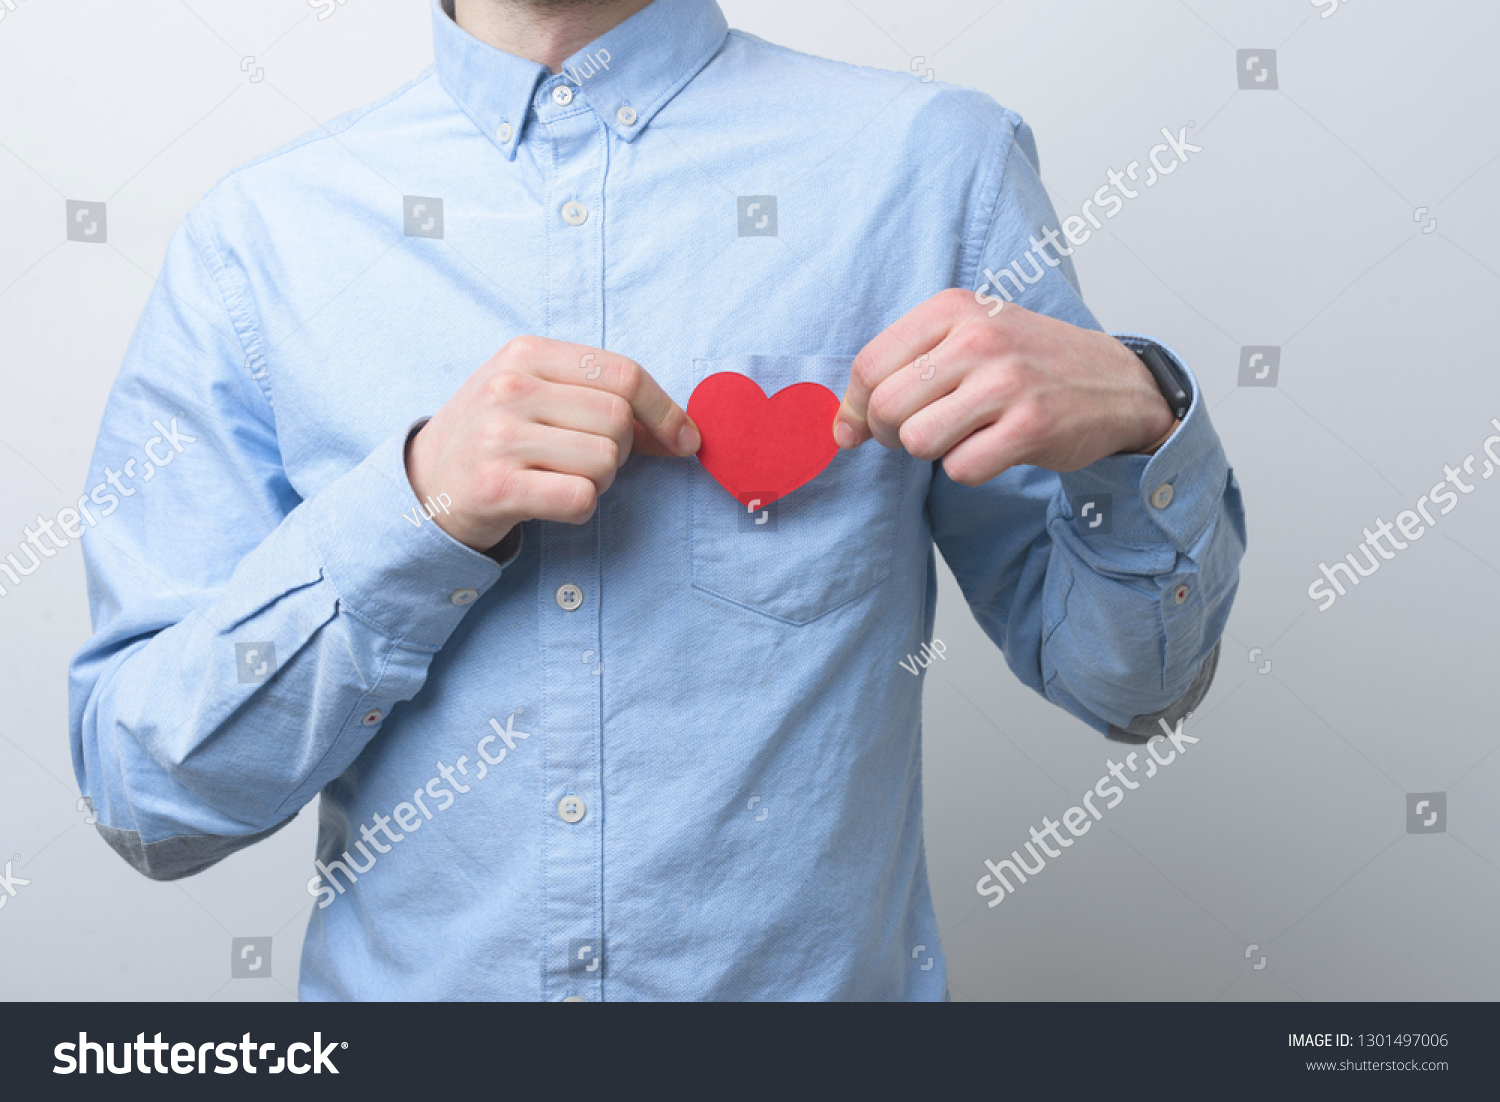 Man wearing a blue shirt is holding a small red heart above his chest. Caring and loving concept. #1301497006